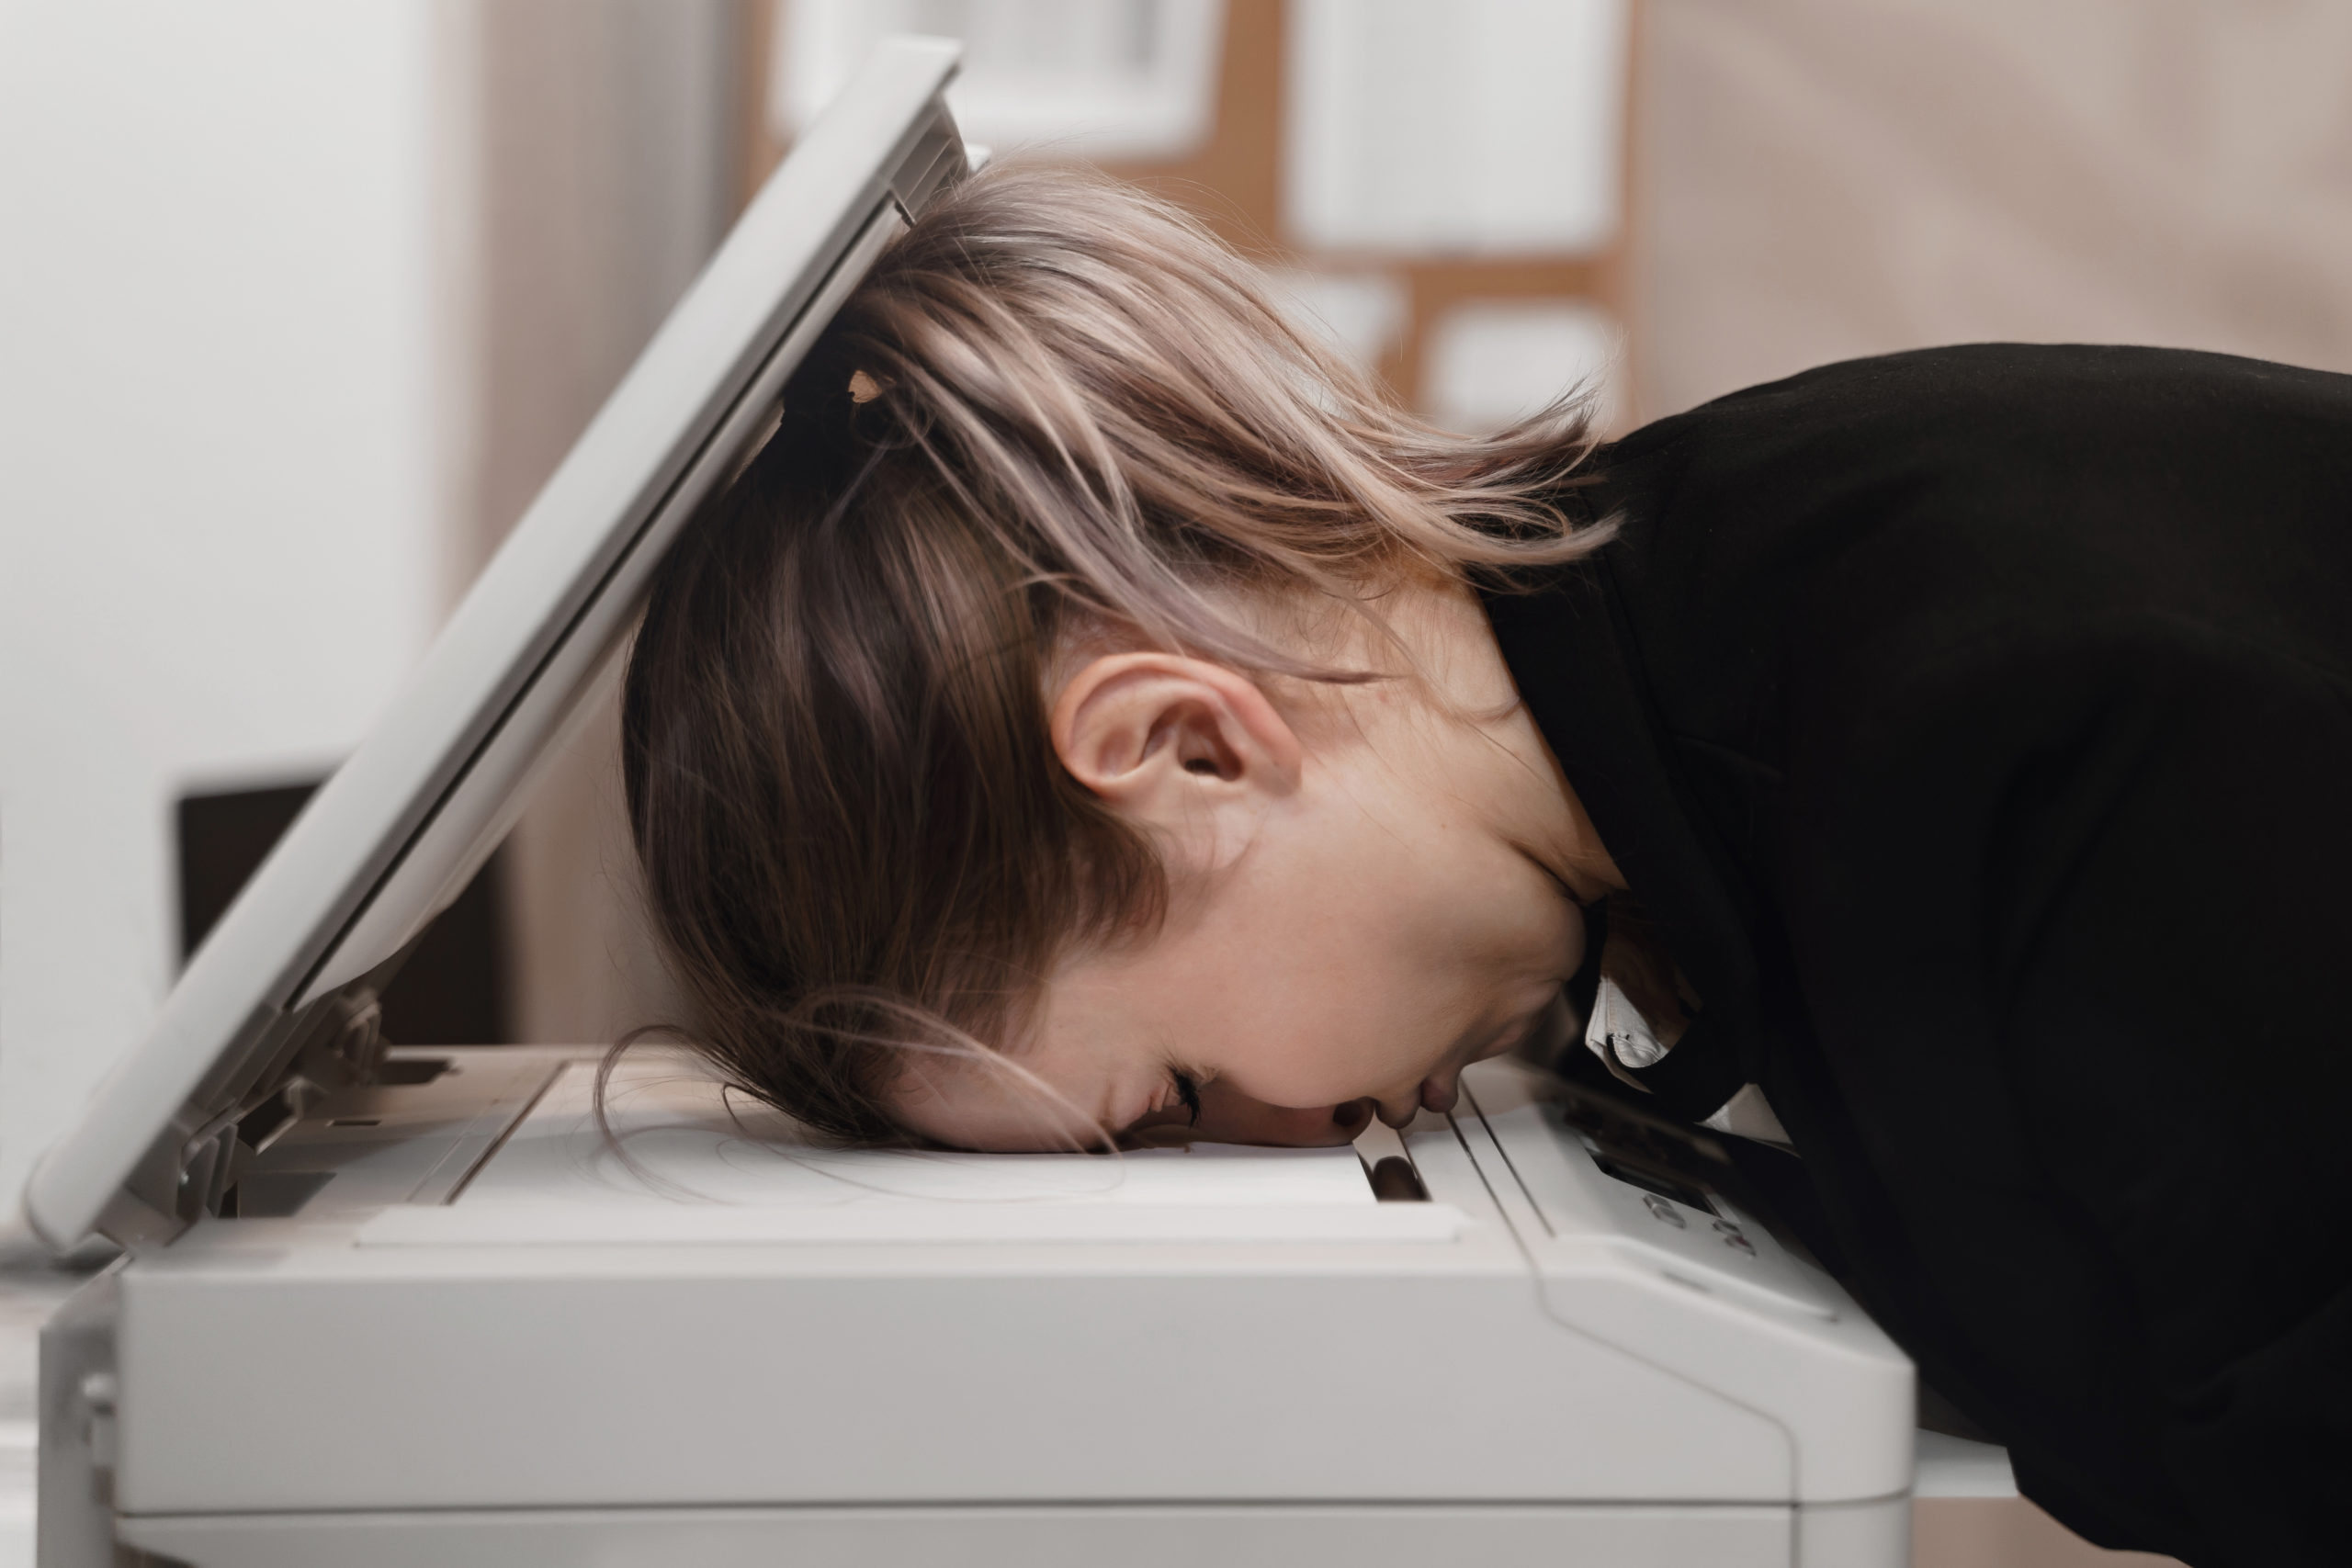 Are you planning to use the printer in Windows 10?